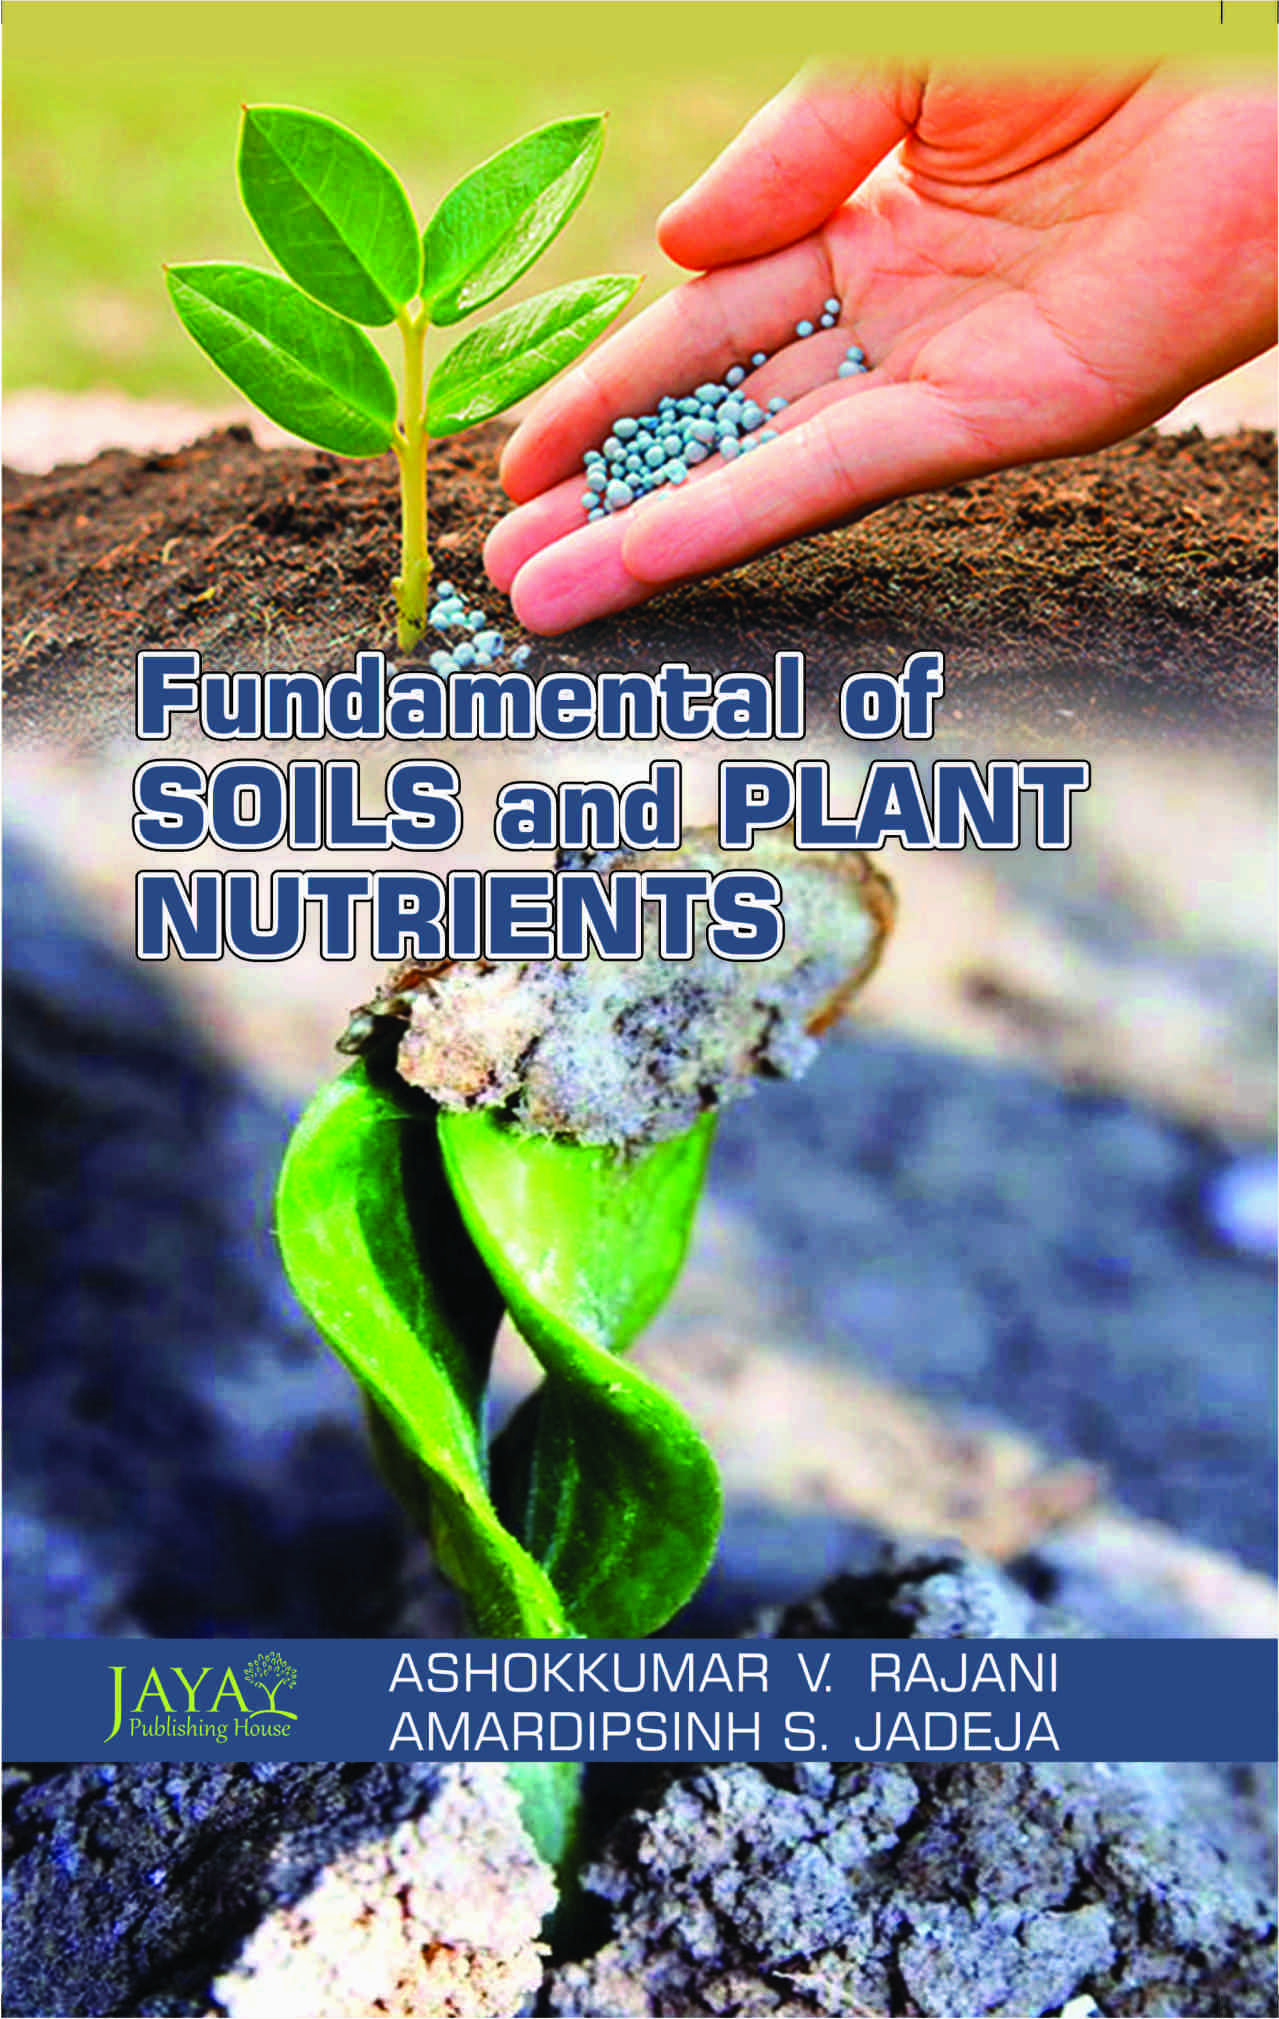 Fundamentals of Soil and Plant Nutrients